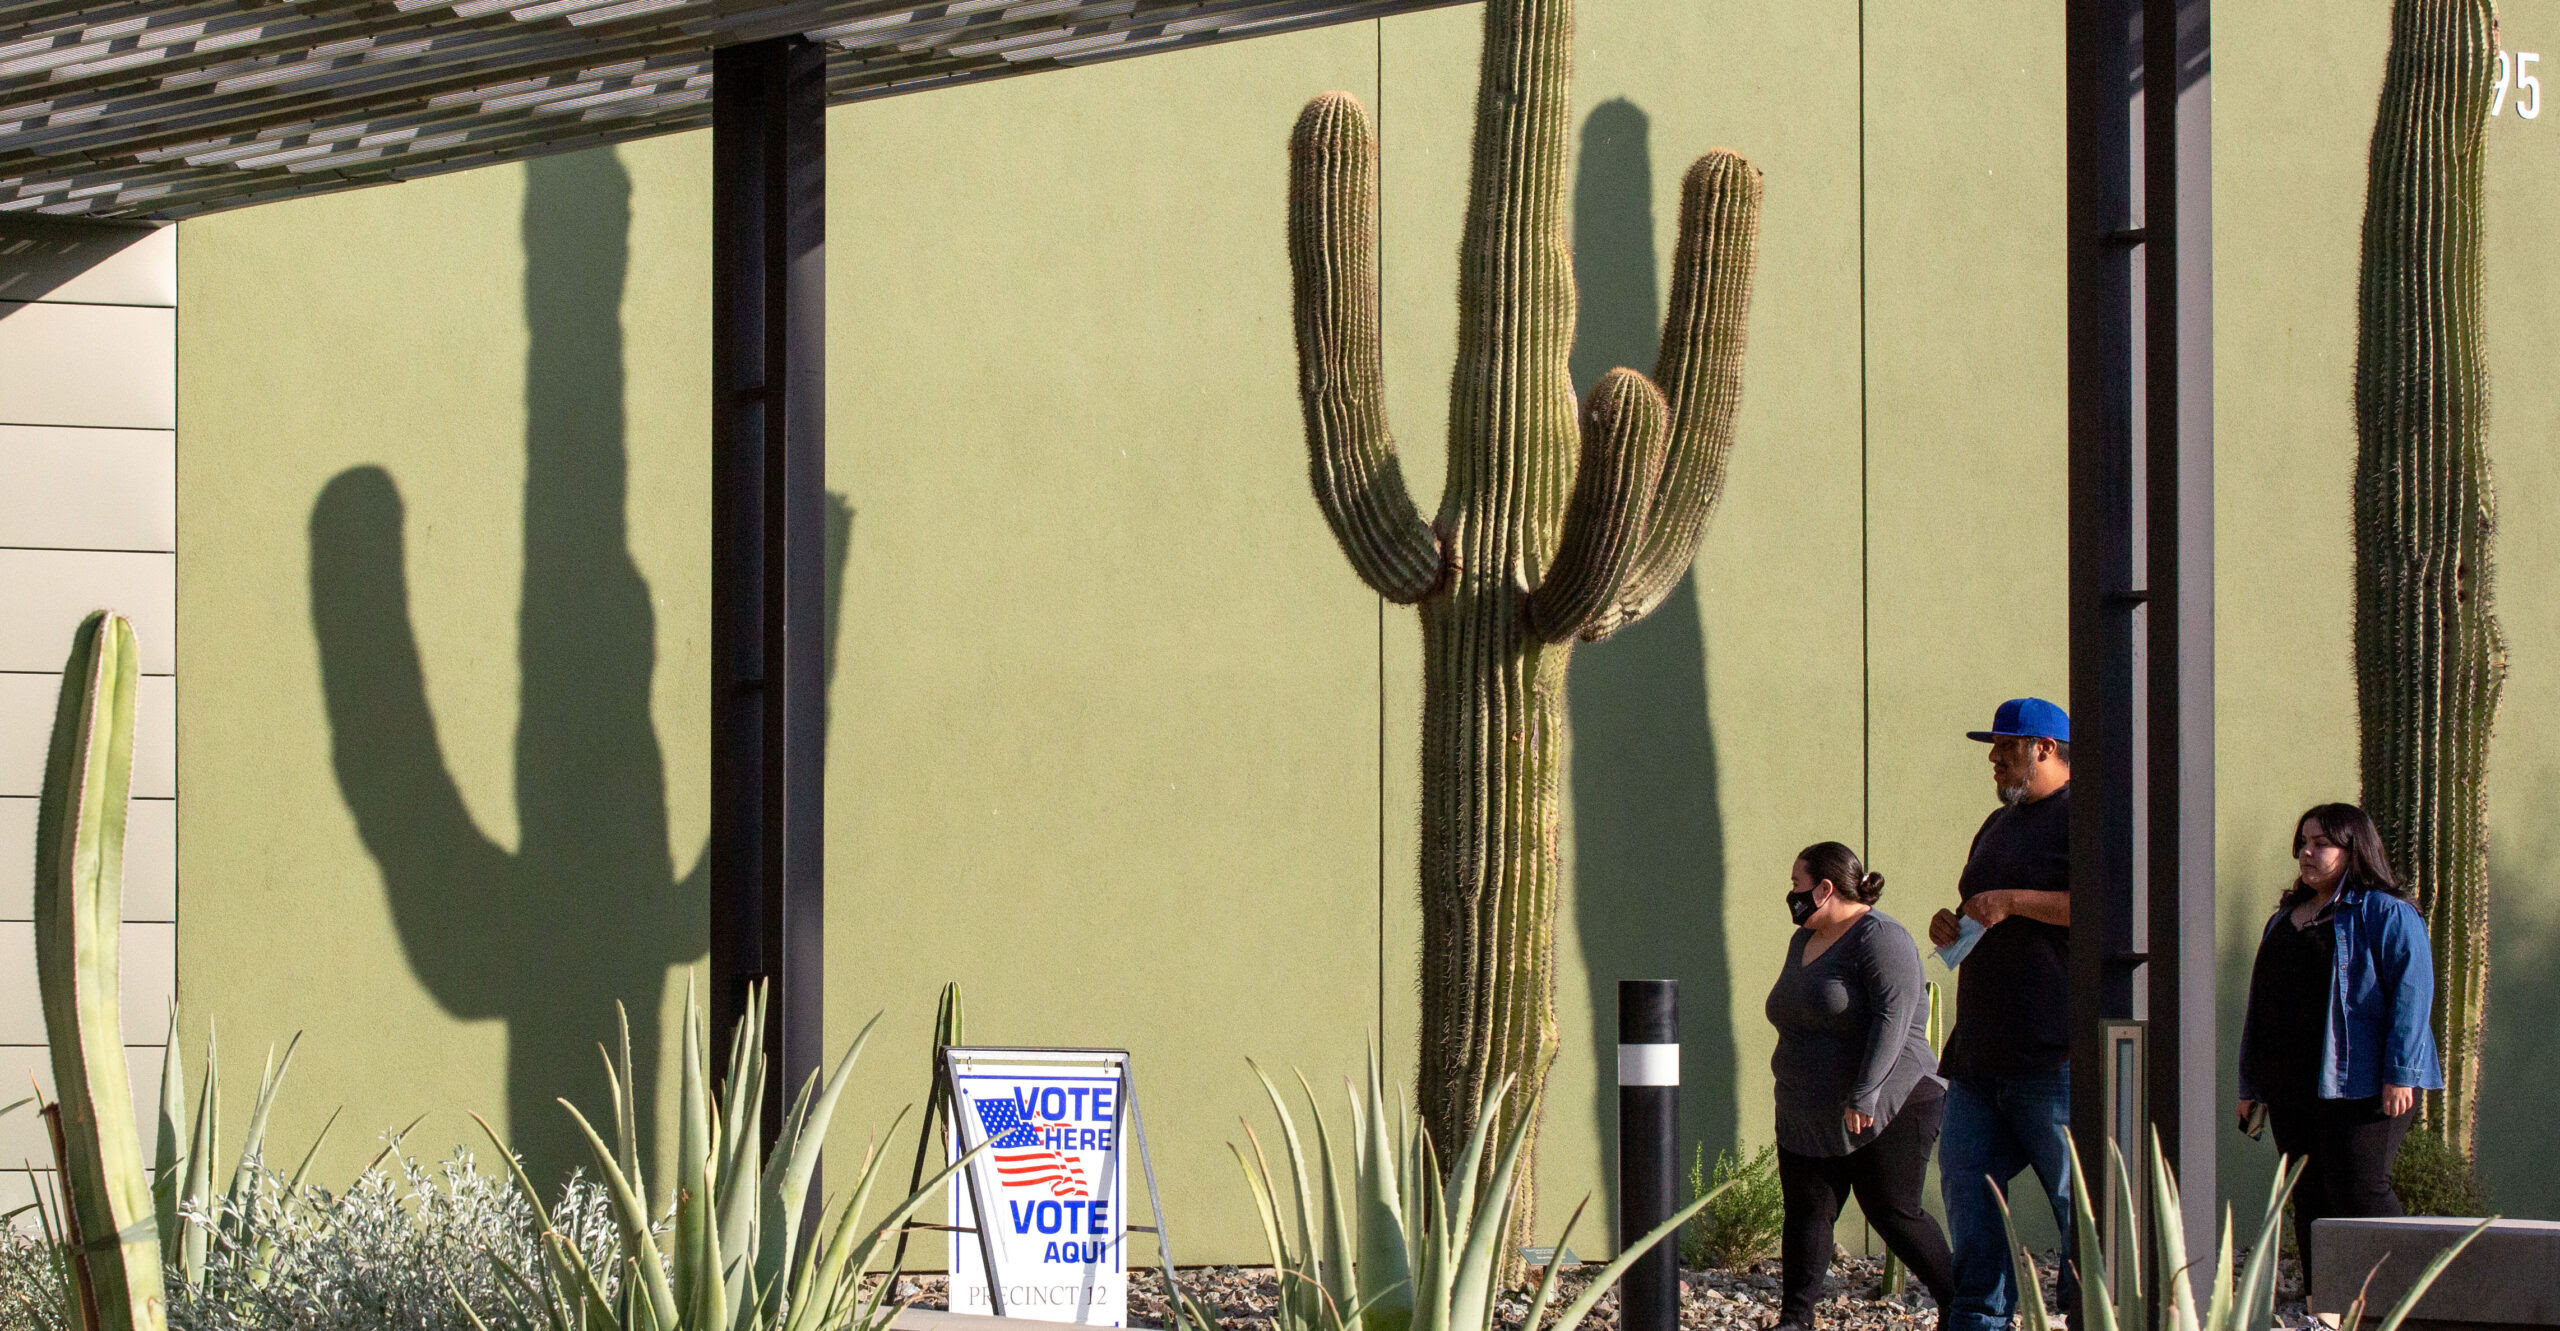 Justice Department Won’t Oppose Arizona Election Reform Before Supreme Court Hears Case